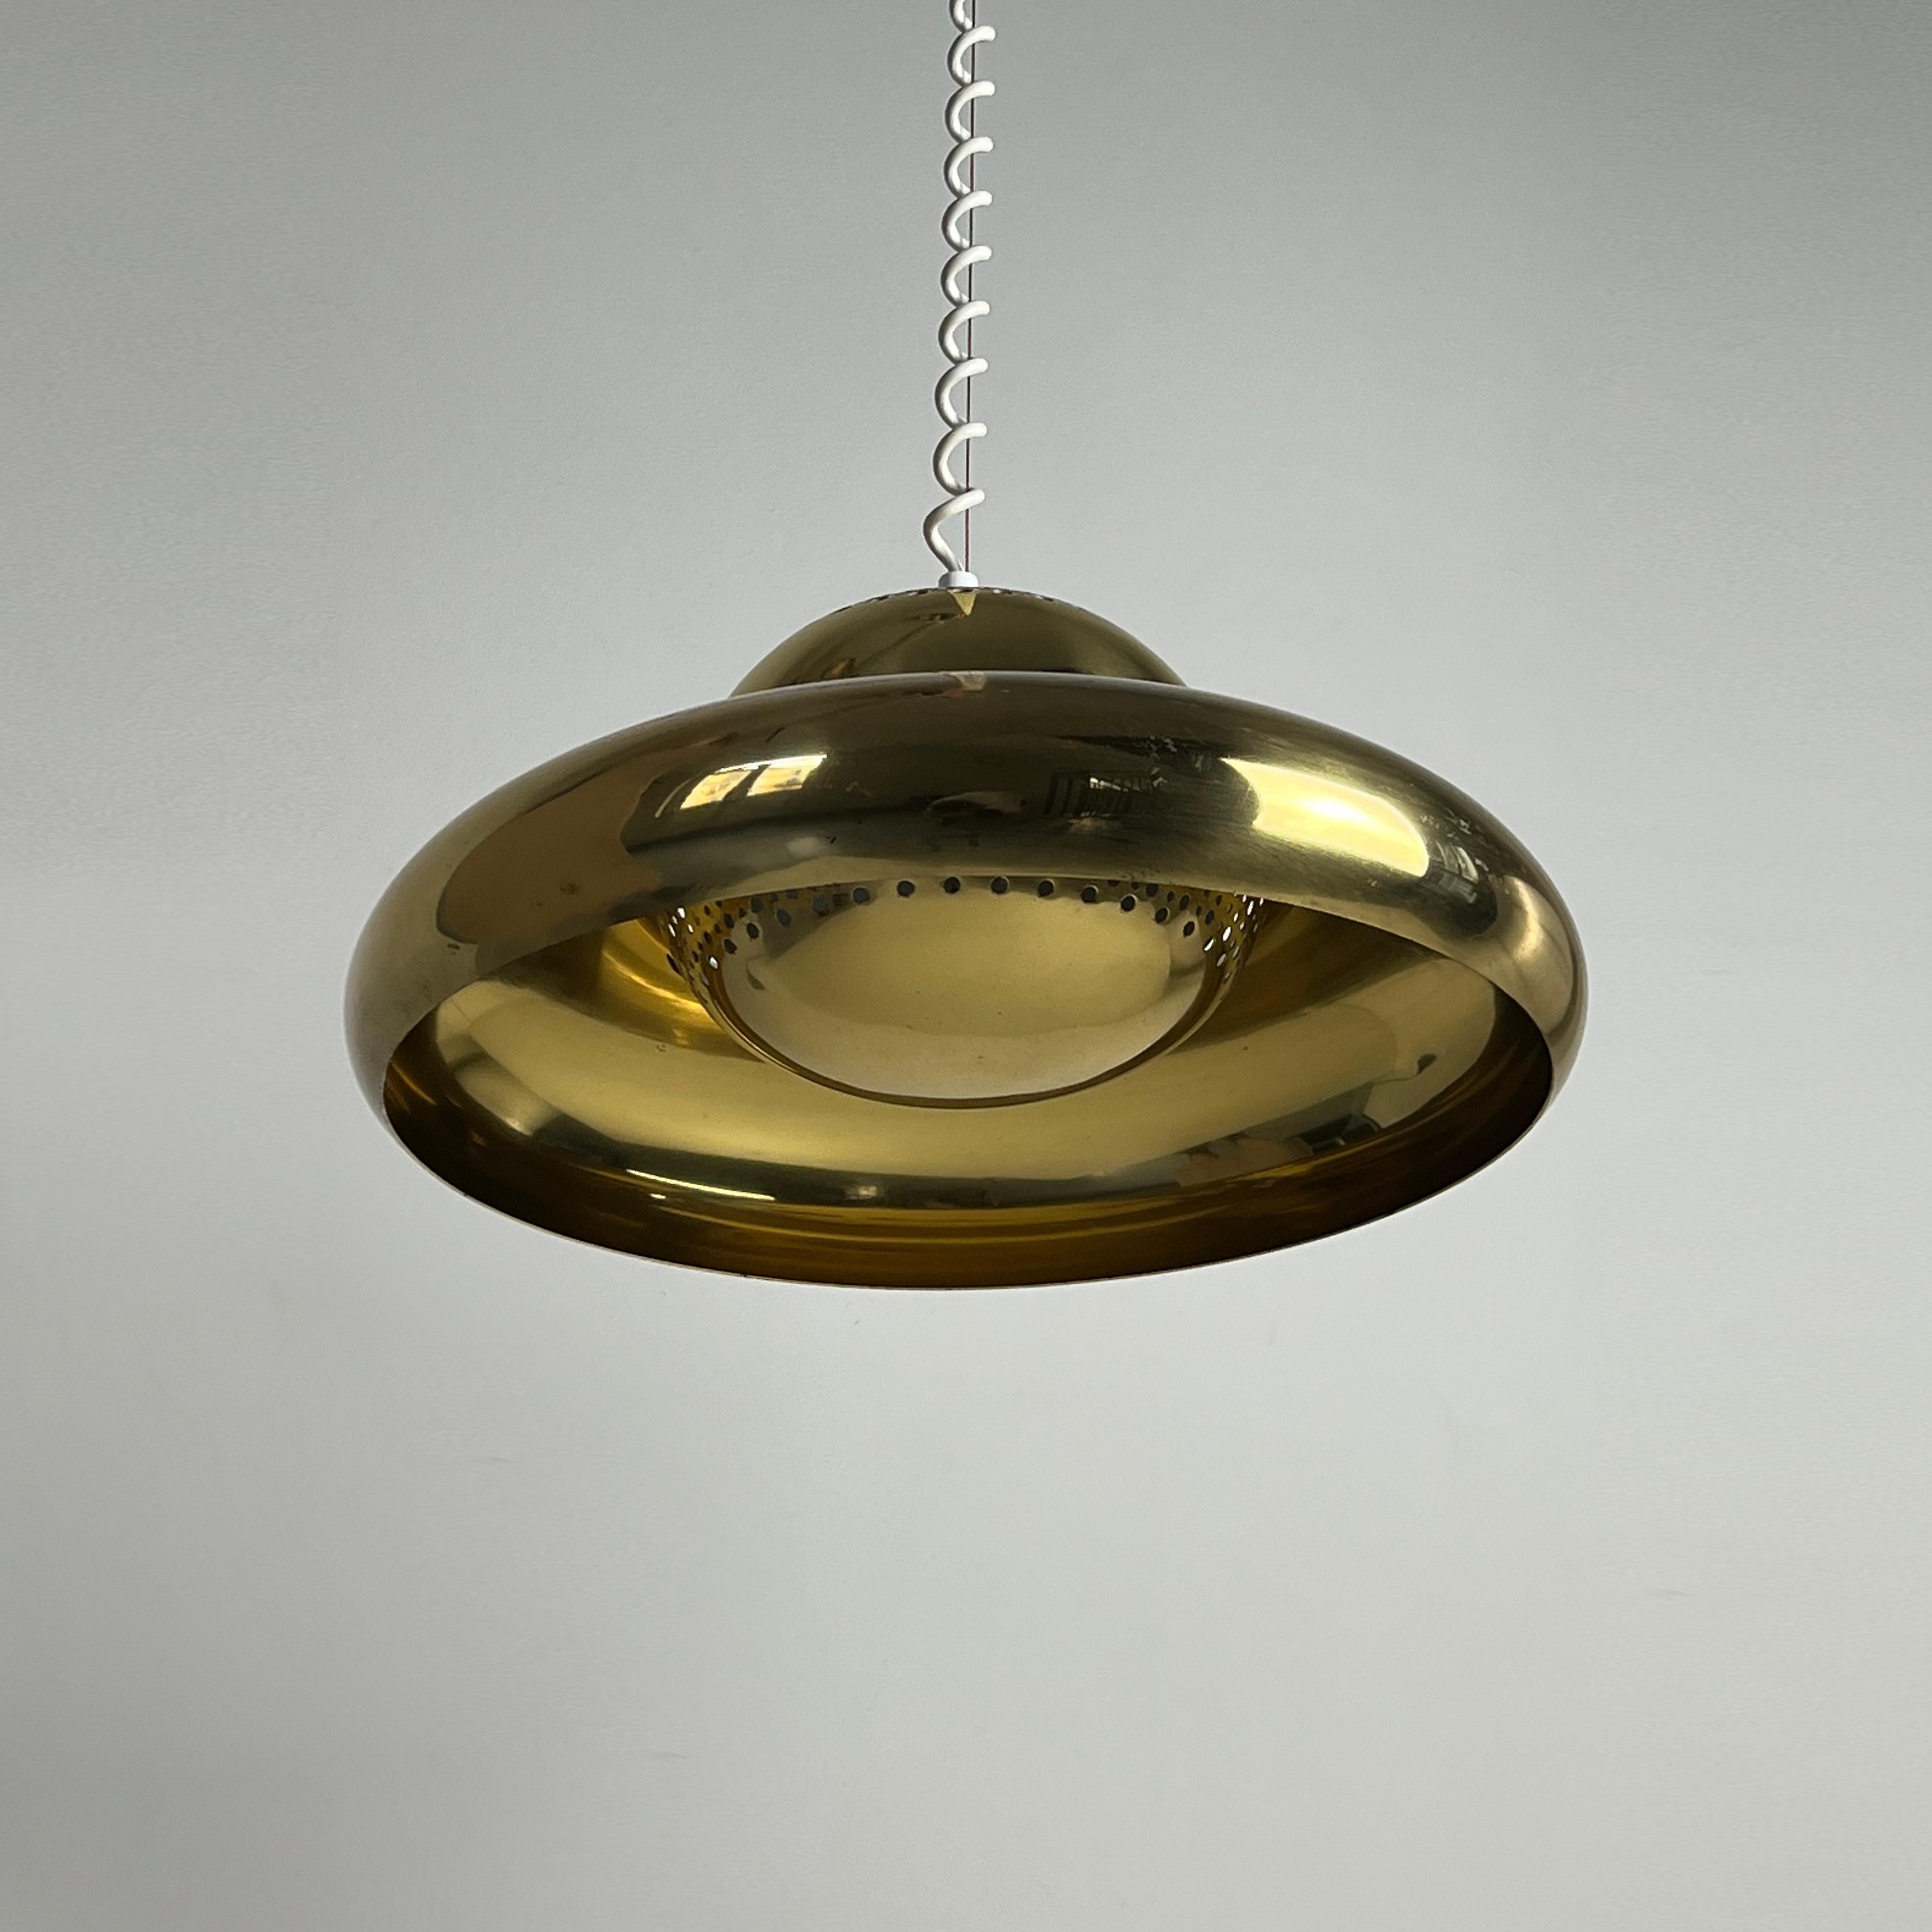 Brass Pendant Fior Di Loto by Afra and Tobia Scarpa for Flos, 1960s For Sale 7